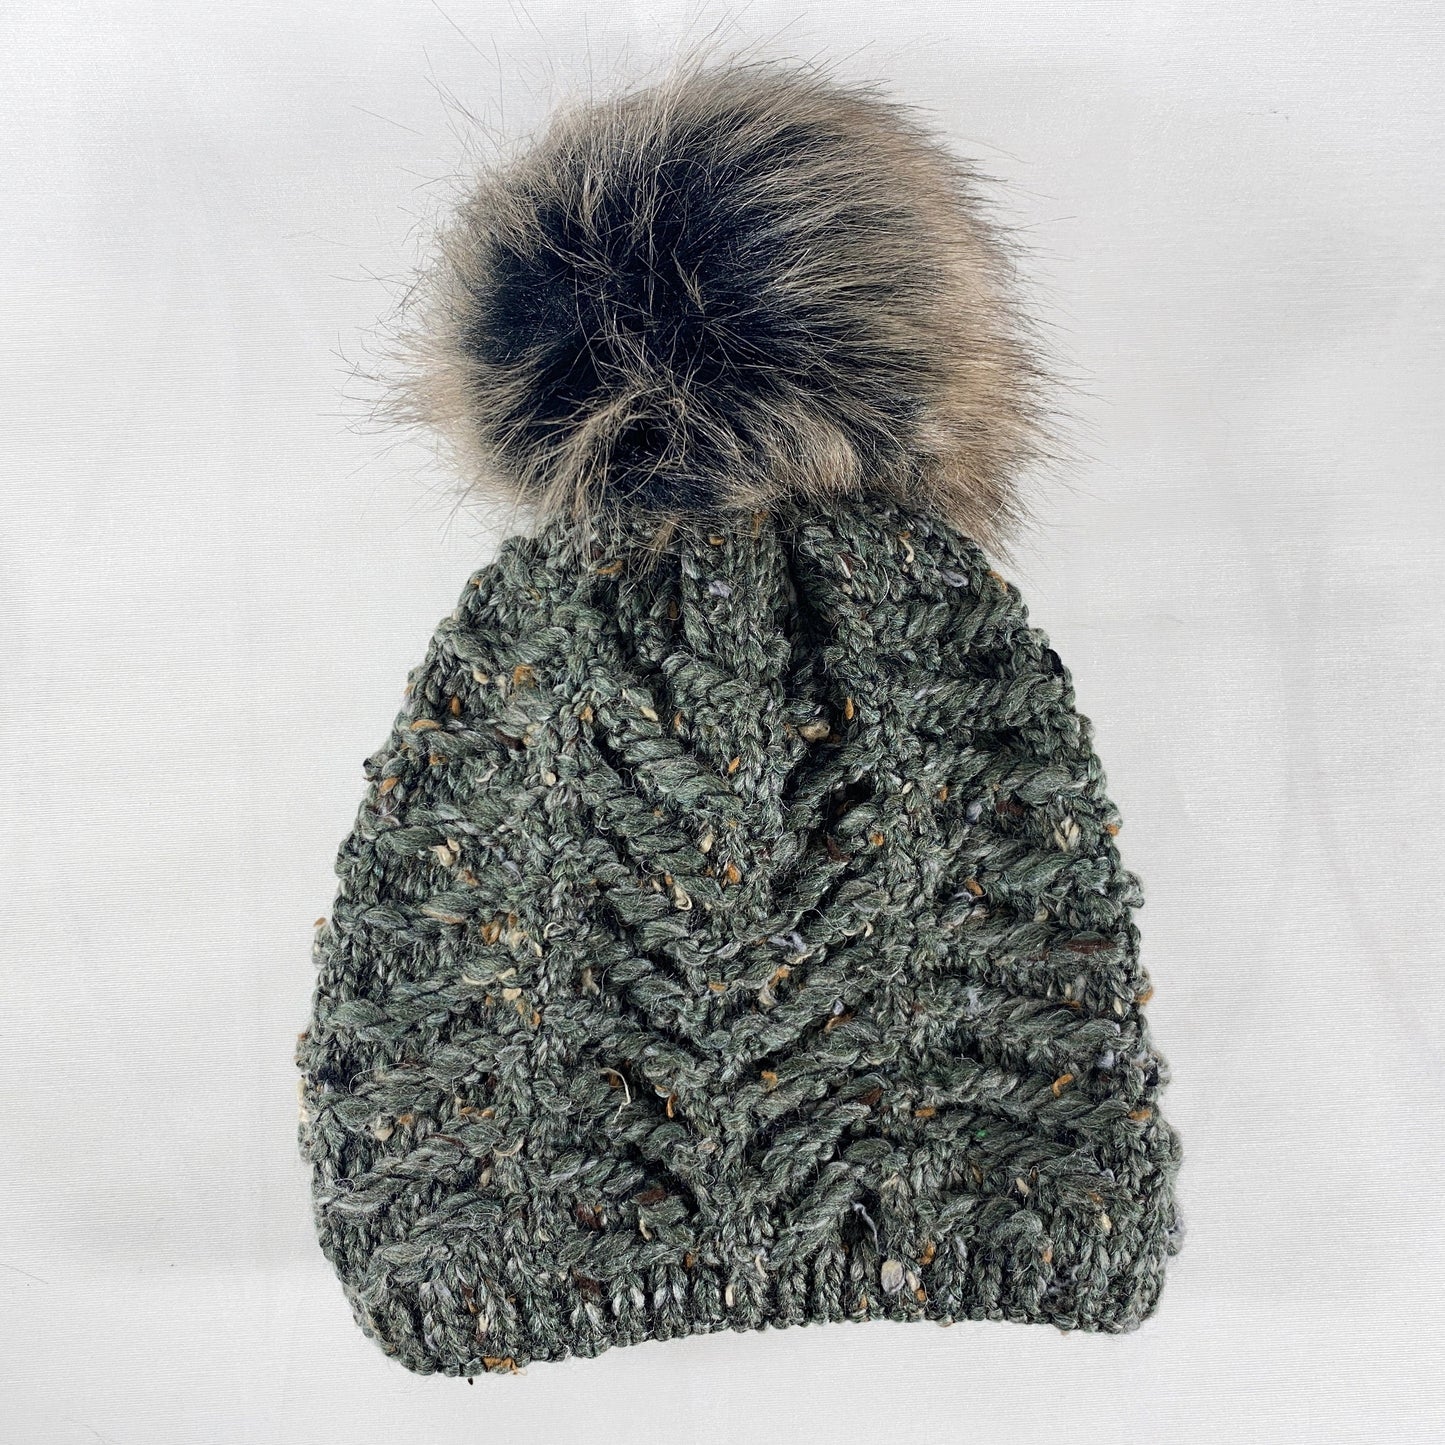 Sage Green Winter Beanie With Pompom - Made From Italian Wool, Acrylic Yarn, and Faux Fur